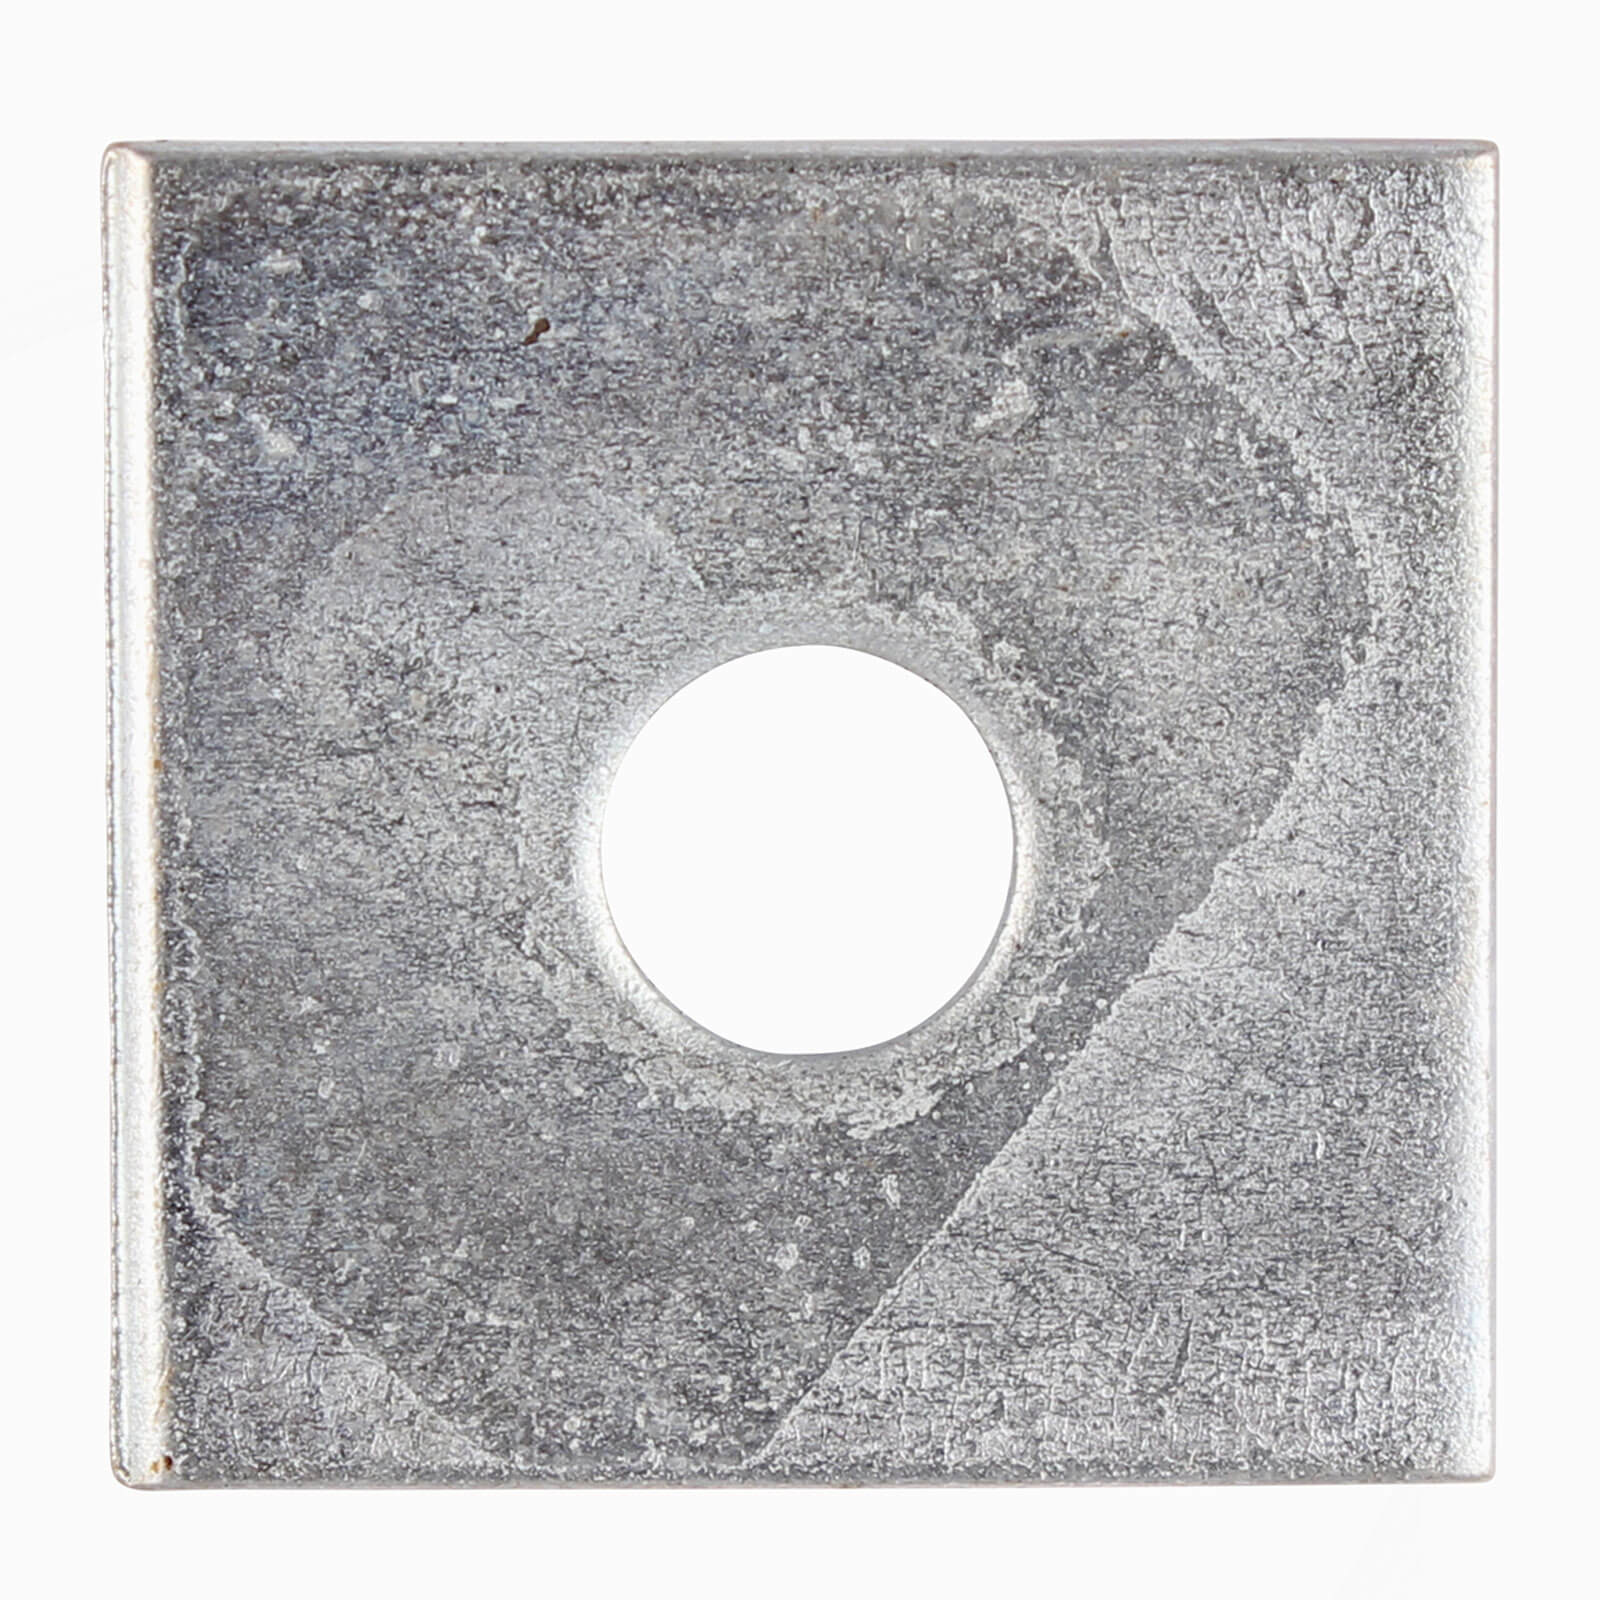 Image of Square Plate Washer Zinc Plated 12mm 50mm Pack of 100